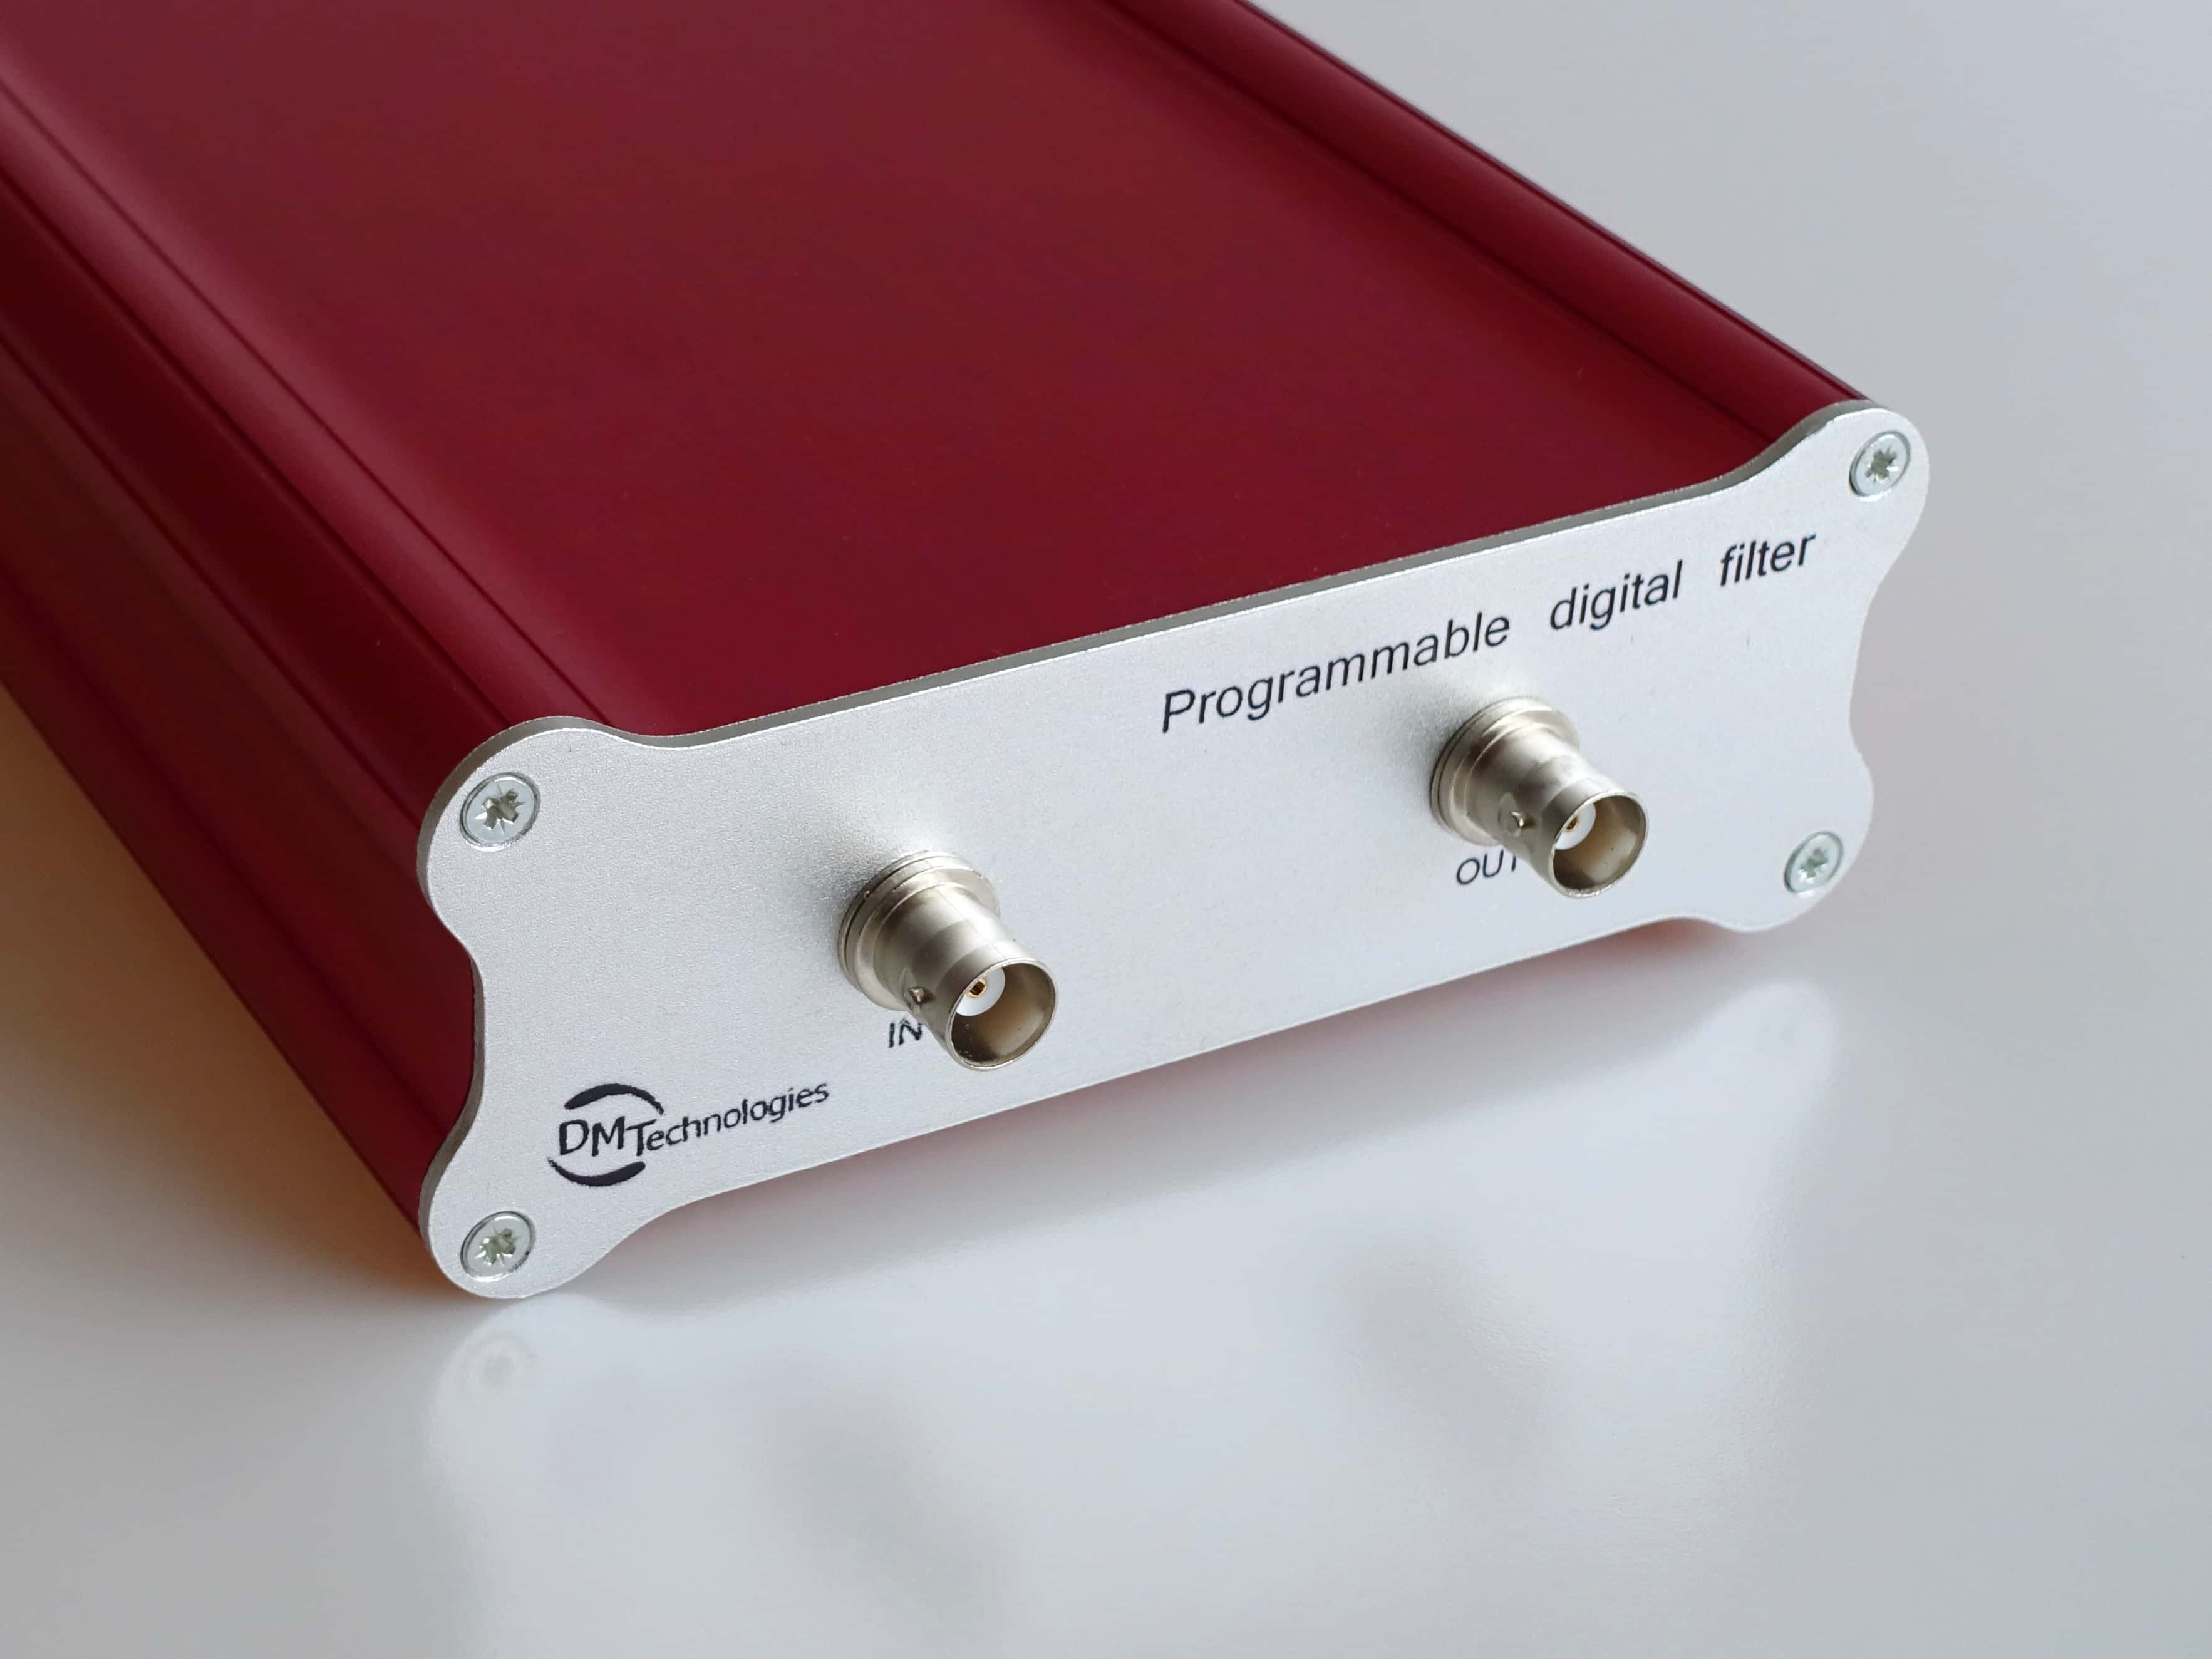 Programmable digital filter with up to 62.5 MHz bandwidth